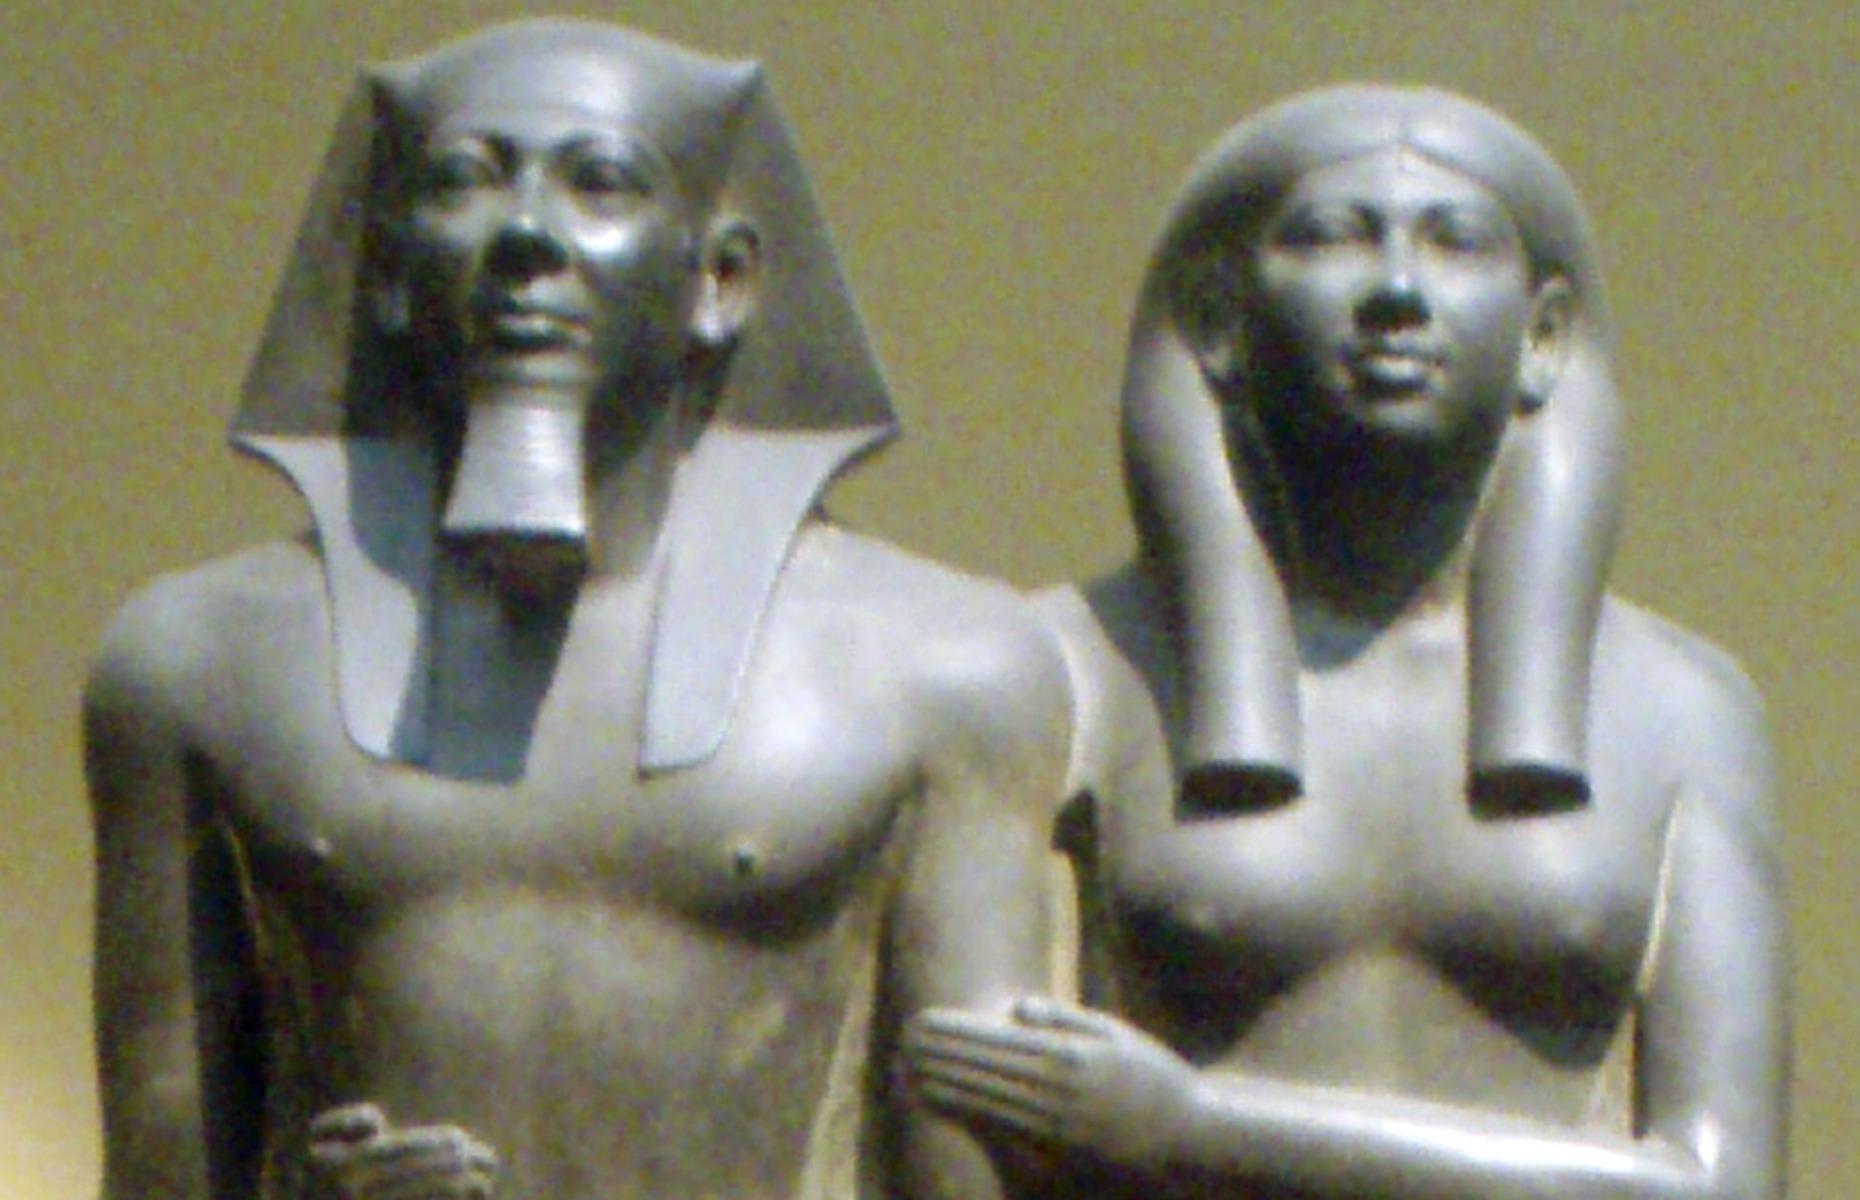 <p>Many statues from inside the tomb depict Menkaure accompanied by gods and other figures. One greywacke stone statue recovered from the pyramid depicts Menkaure and his wife standing side by side. It's a classic example of Old Kingdom royal tomb sculpture, with both the king's arms down by his sides and with one leg stepped forward.</p>